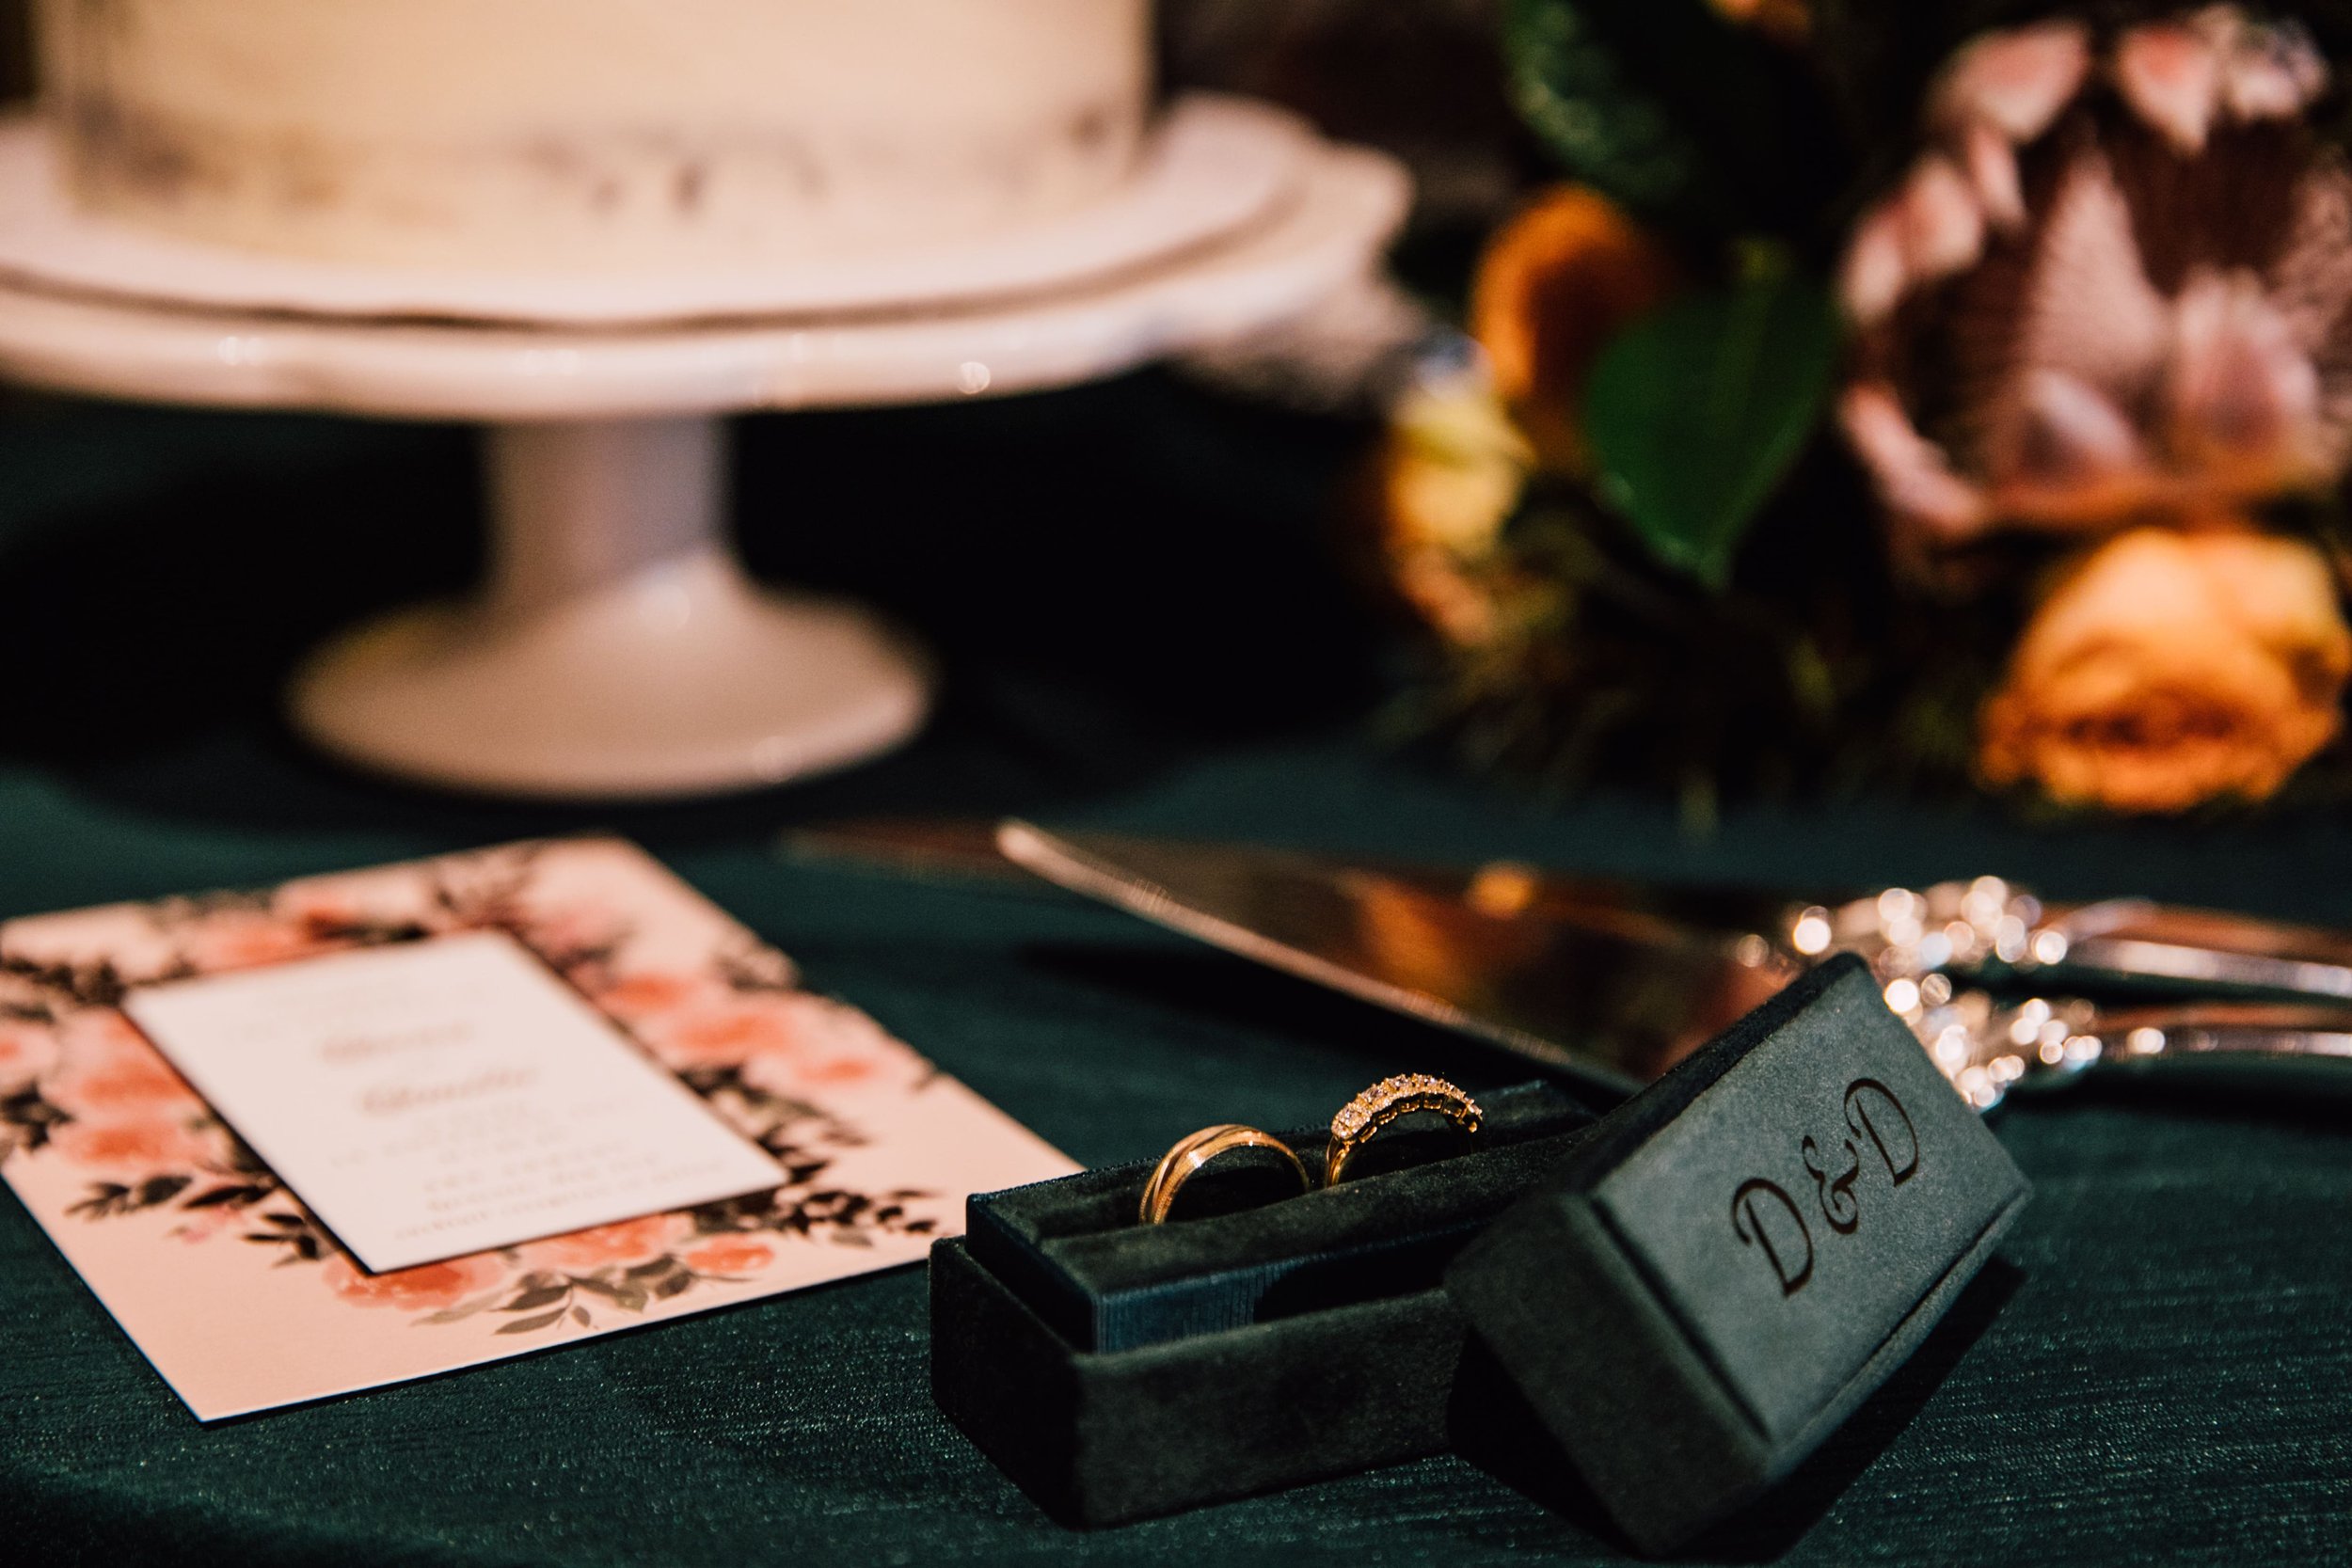  a syracuse wedding photographer snapped a beautiful photo of wedding day details, the couple’s rings sit in a green velvet jewelry box as their wedding cake, invitation, florals, and cake spatula rest out of focus in the background 